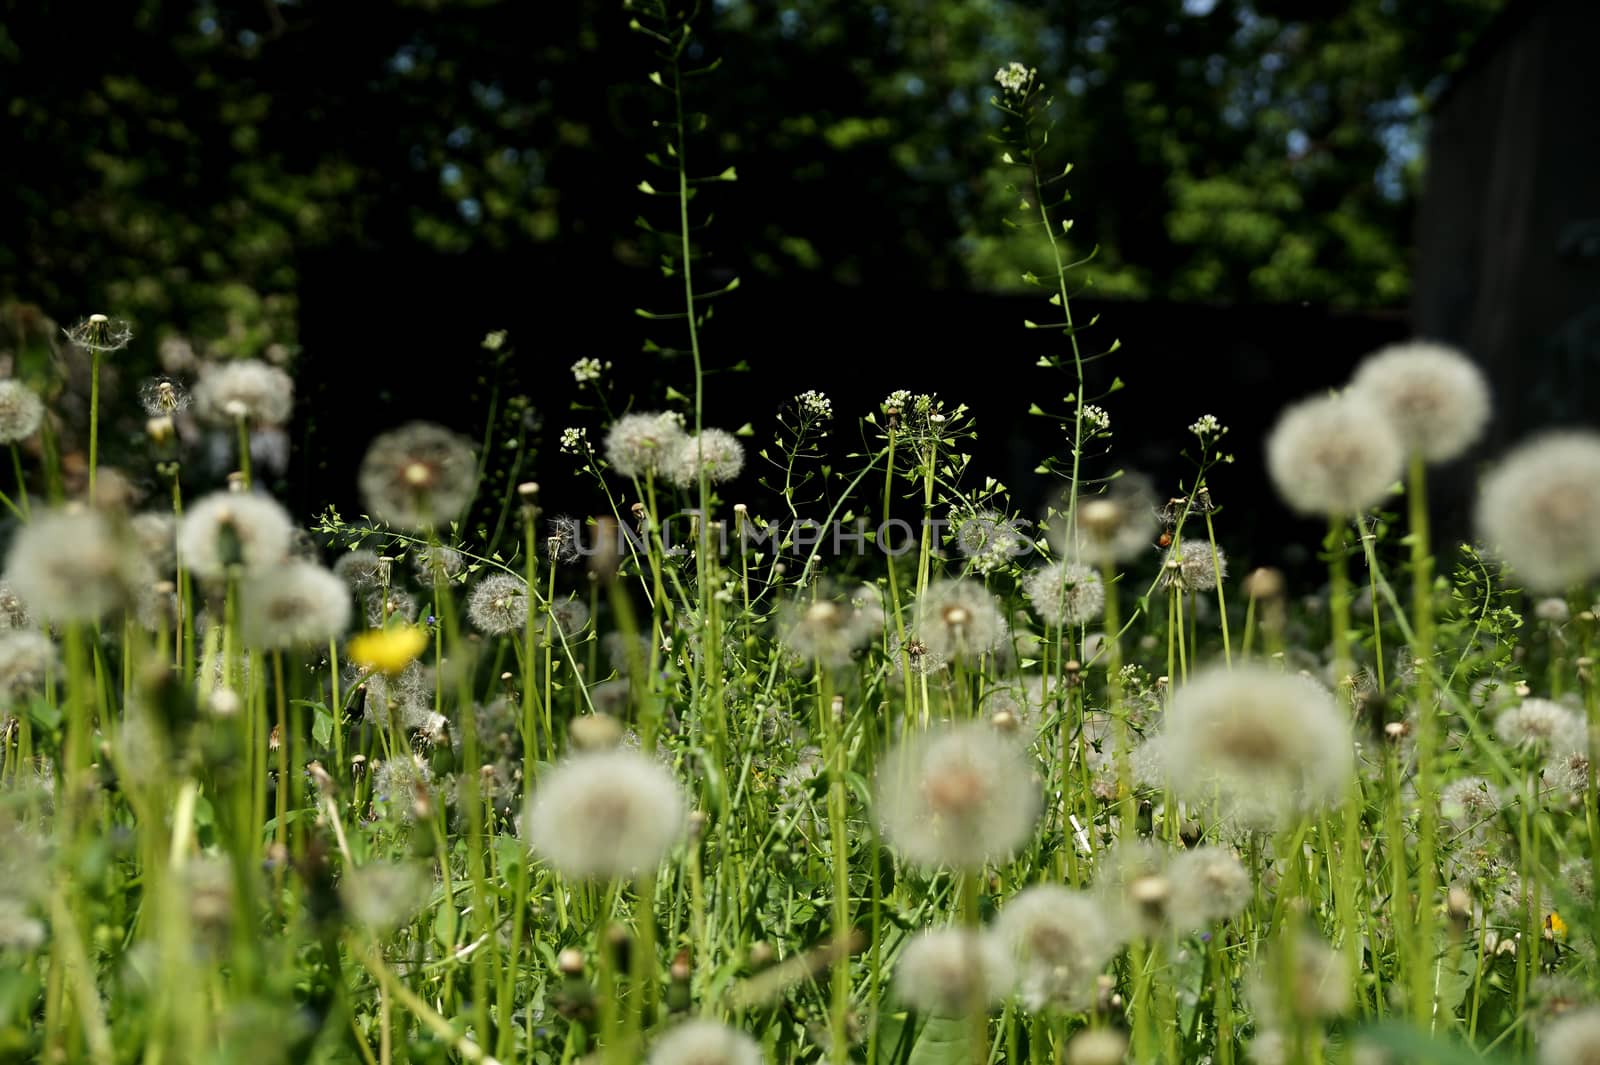 The blossoming flowers of dandelions by Vadimdem